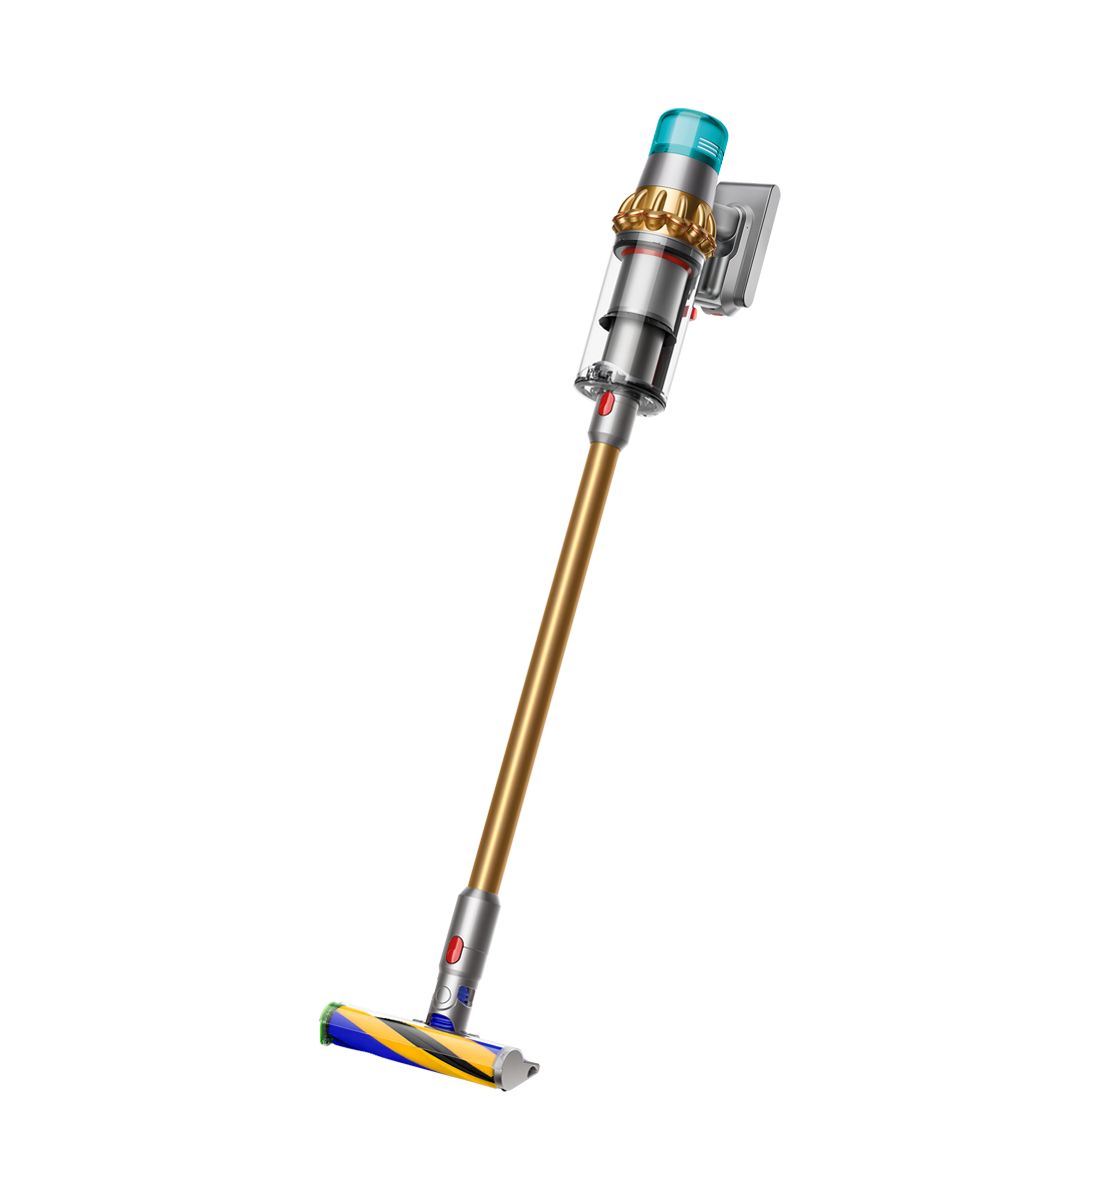 Dyson V15 Detect Absolute (Gold/Iron)